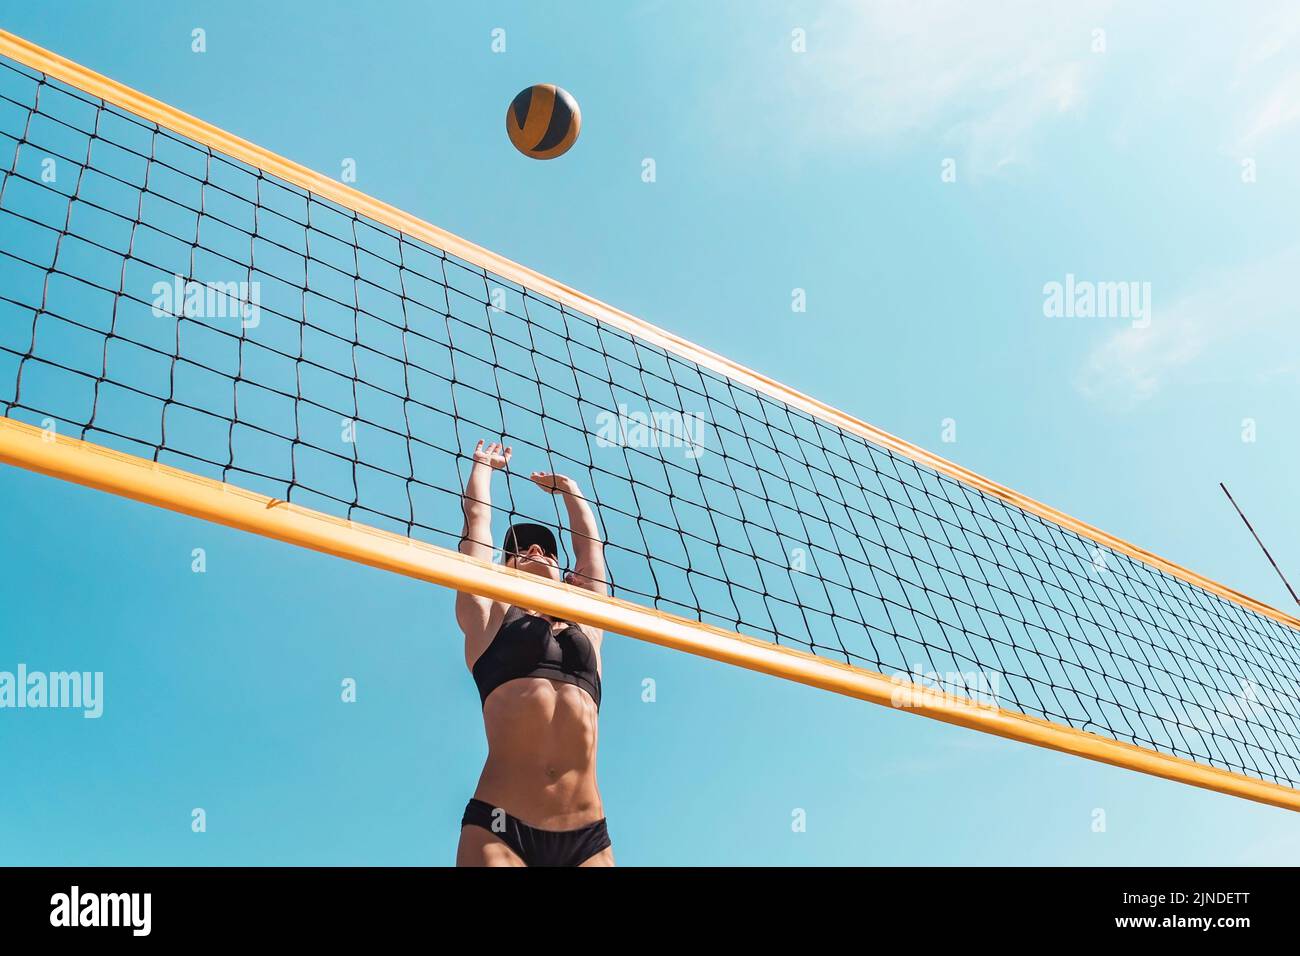 Teenage girl playing beach volleyball. Beach volleyball championship. The woman reaches for the ball. throwing a yellow volleyball over the net. Victo Stock Photo